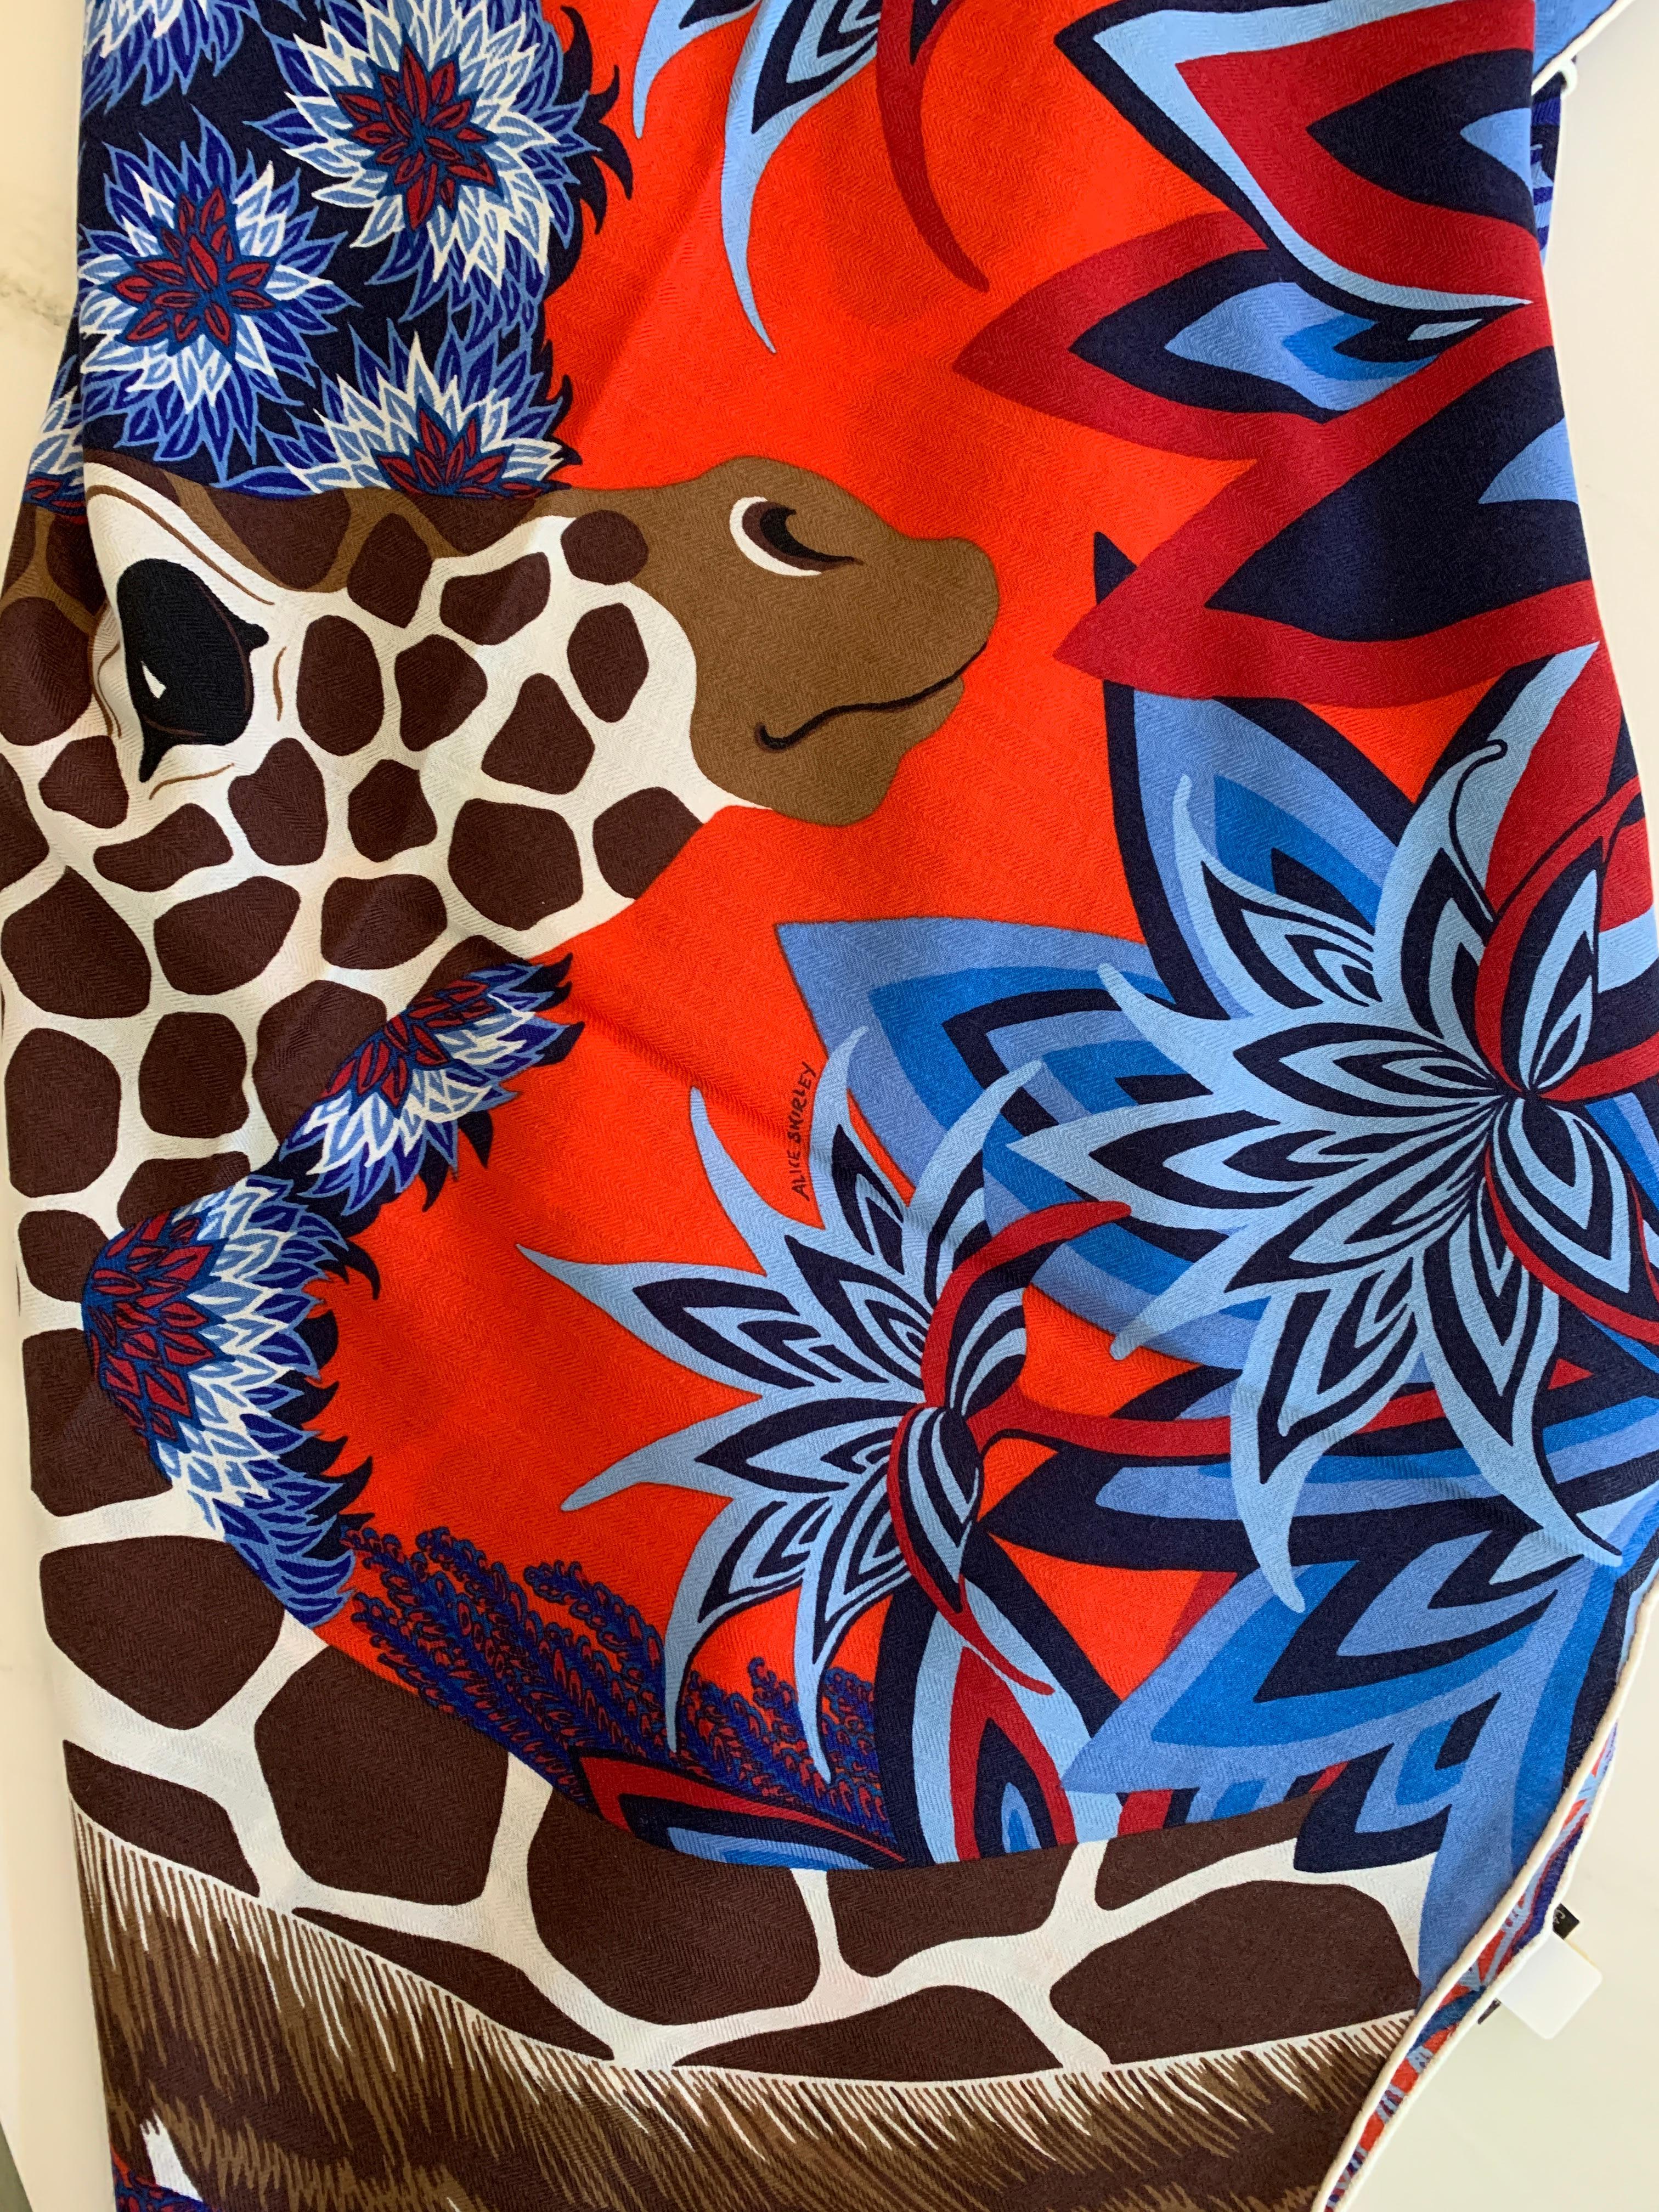 Women's or Men's Hermes Cashmere Shawl/Scarf The Three Graces  Giraffes Alice Shirley